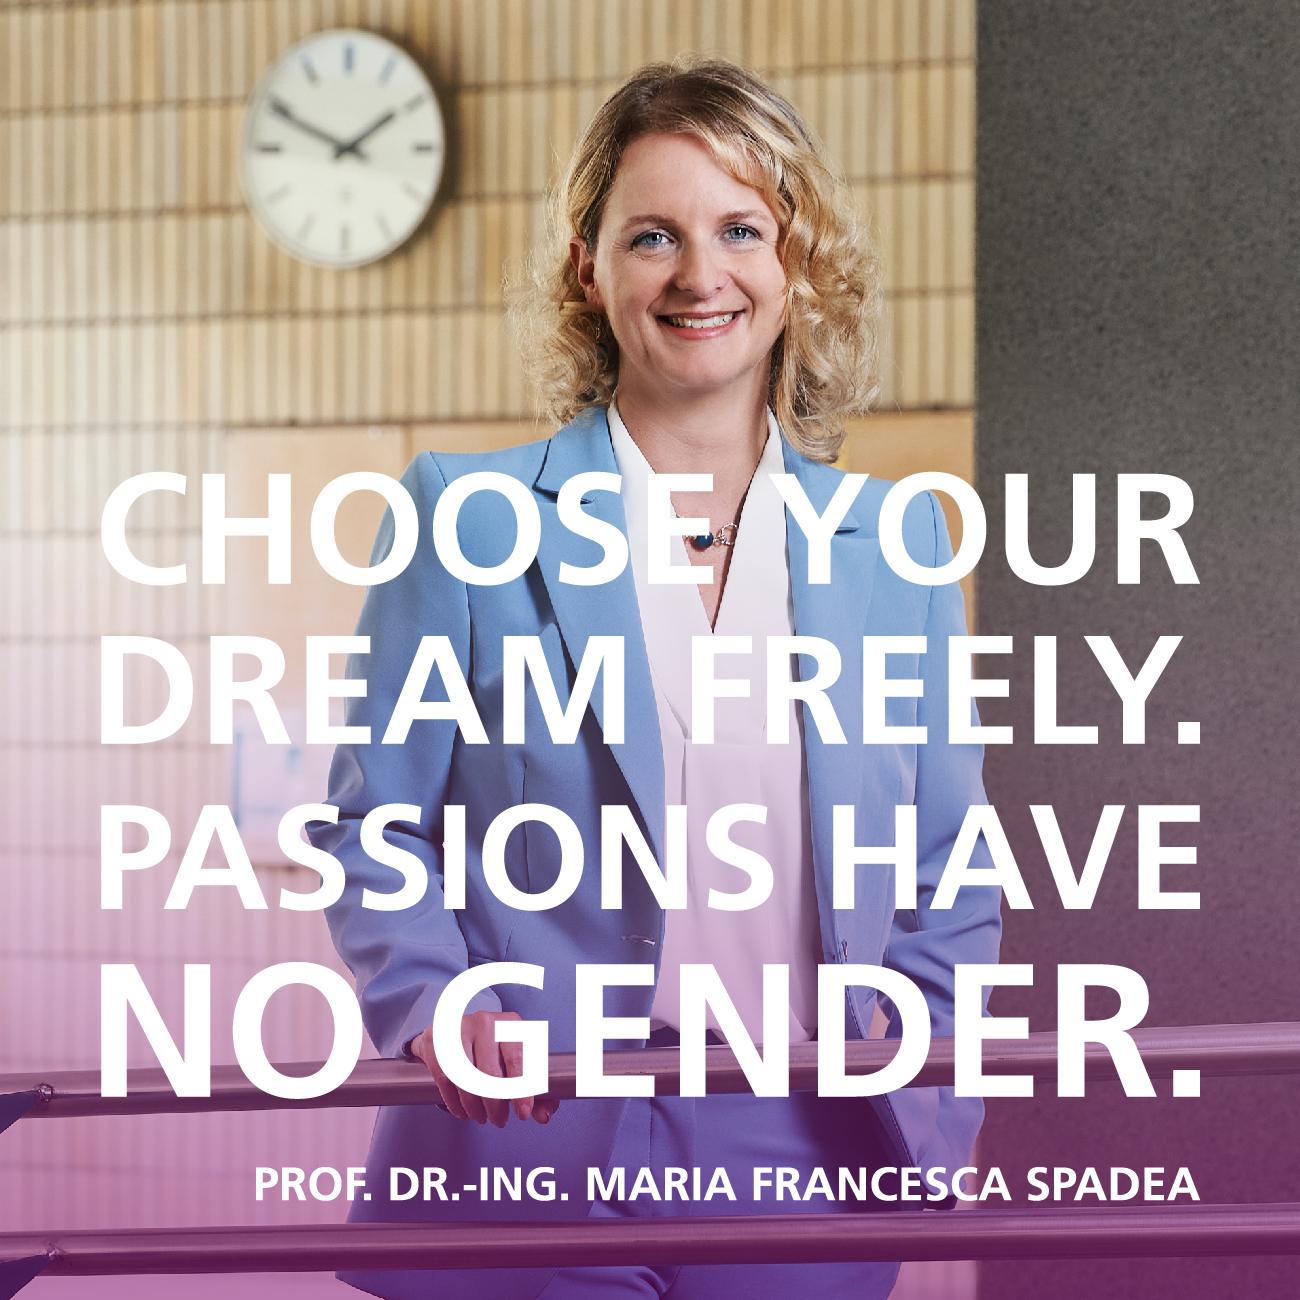 Choose your dream freely. Passions have no gender. Quote by  Prof. Dr.-Ing. Maria Francesca Spadea, Division 3, KIT | Copyright: KIT | B3 | M. Hauser